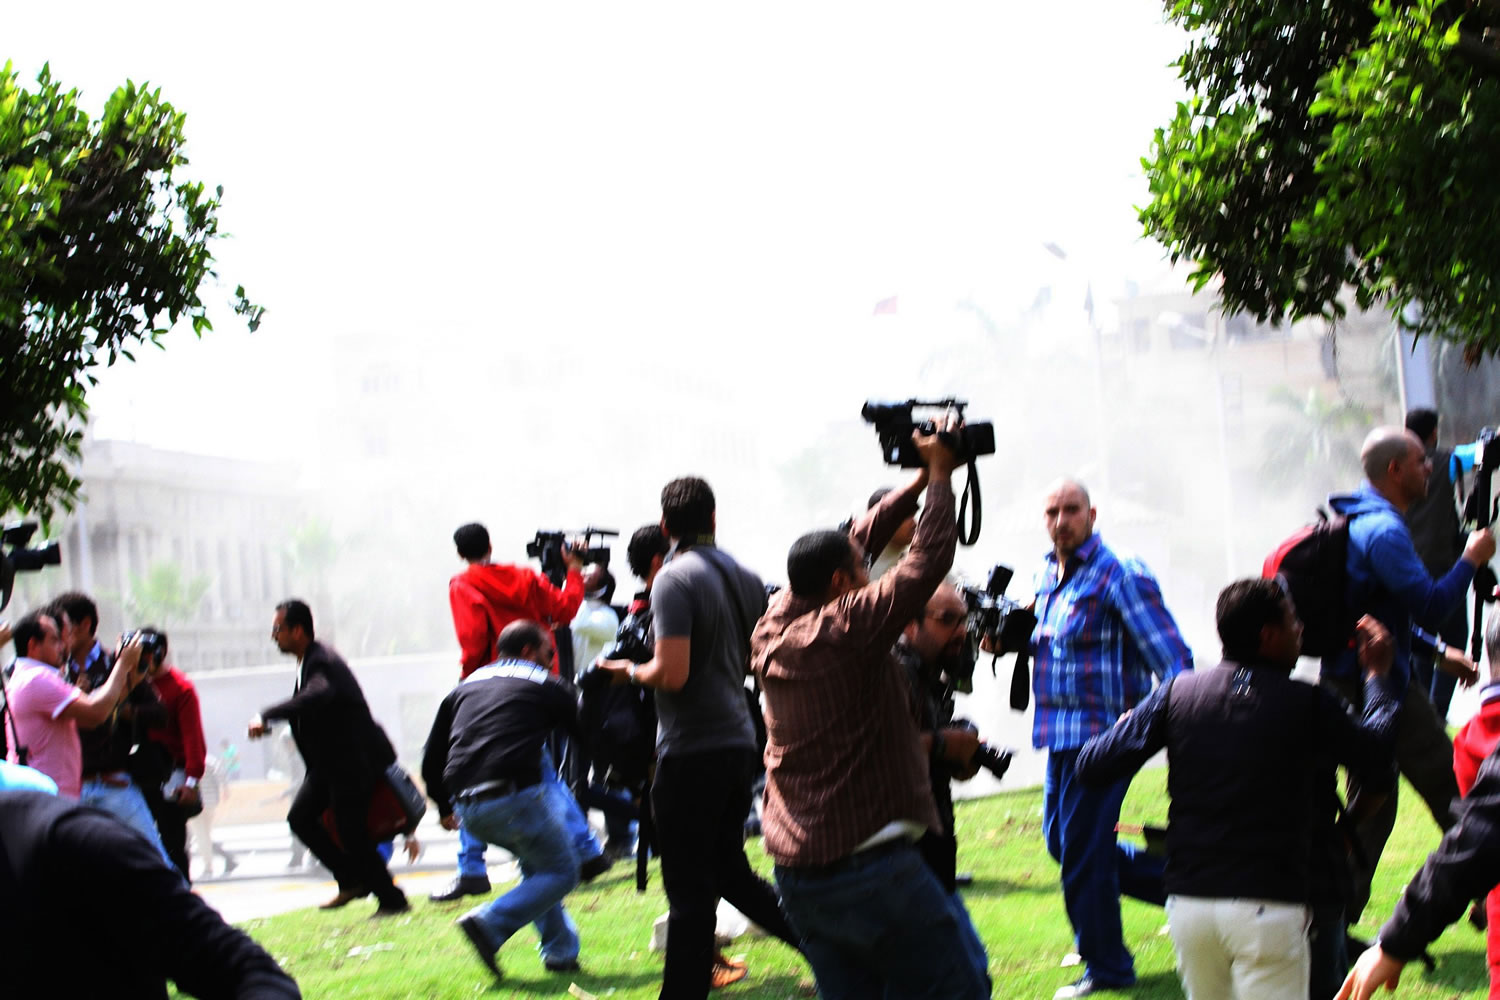 Journalists react to an explosion outside of Cairo University on Wednesday, the third of three blasts at the site that targeted security forces and killed a police general.